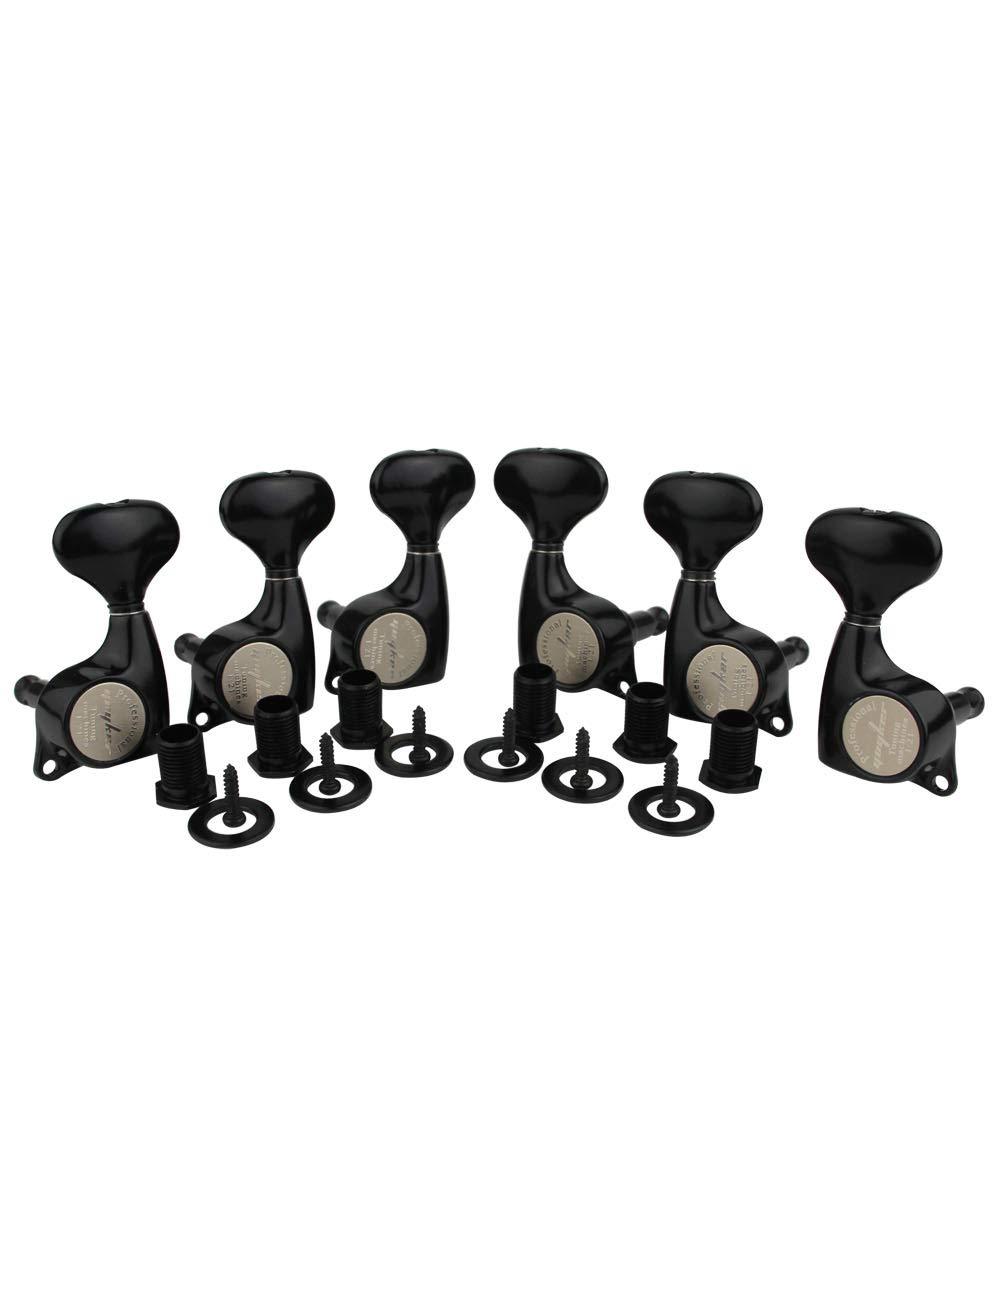 Guyker 6Pcs Guitar Machine Heads (3L + 3R) – 1:21 Sealed Tuning Key Pegs Tuners Set Replacement for ST Tele SG Style Electric or Acoustic Guitars – Black